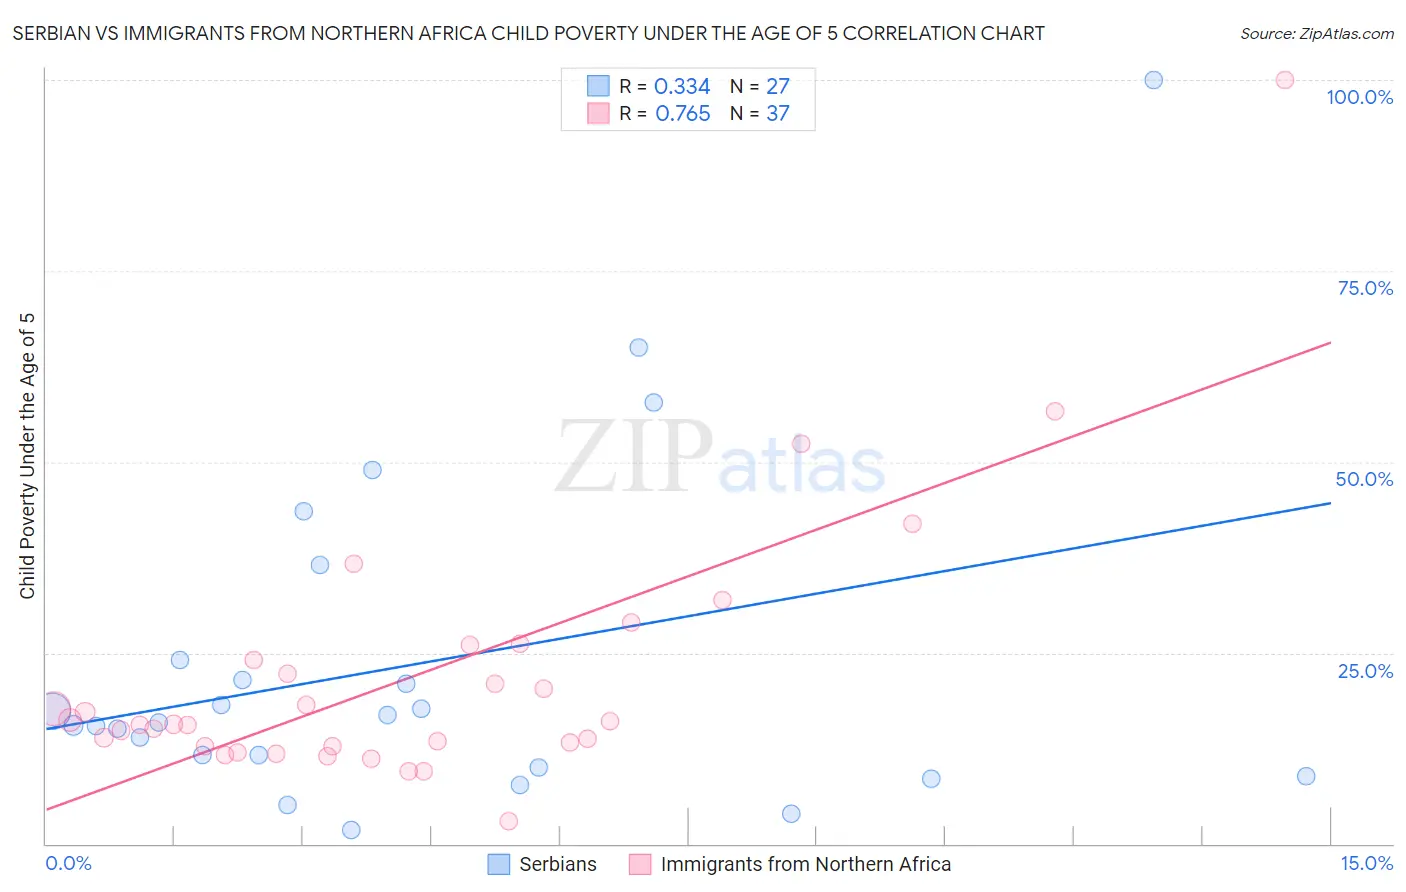 Serbian vs Immigrants from Northern Africa Child Poverty Under the Age of 5